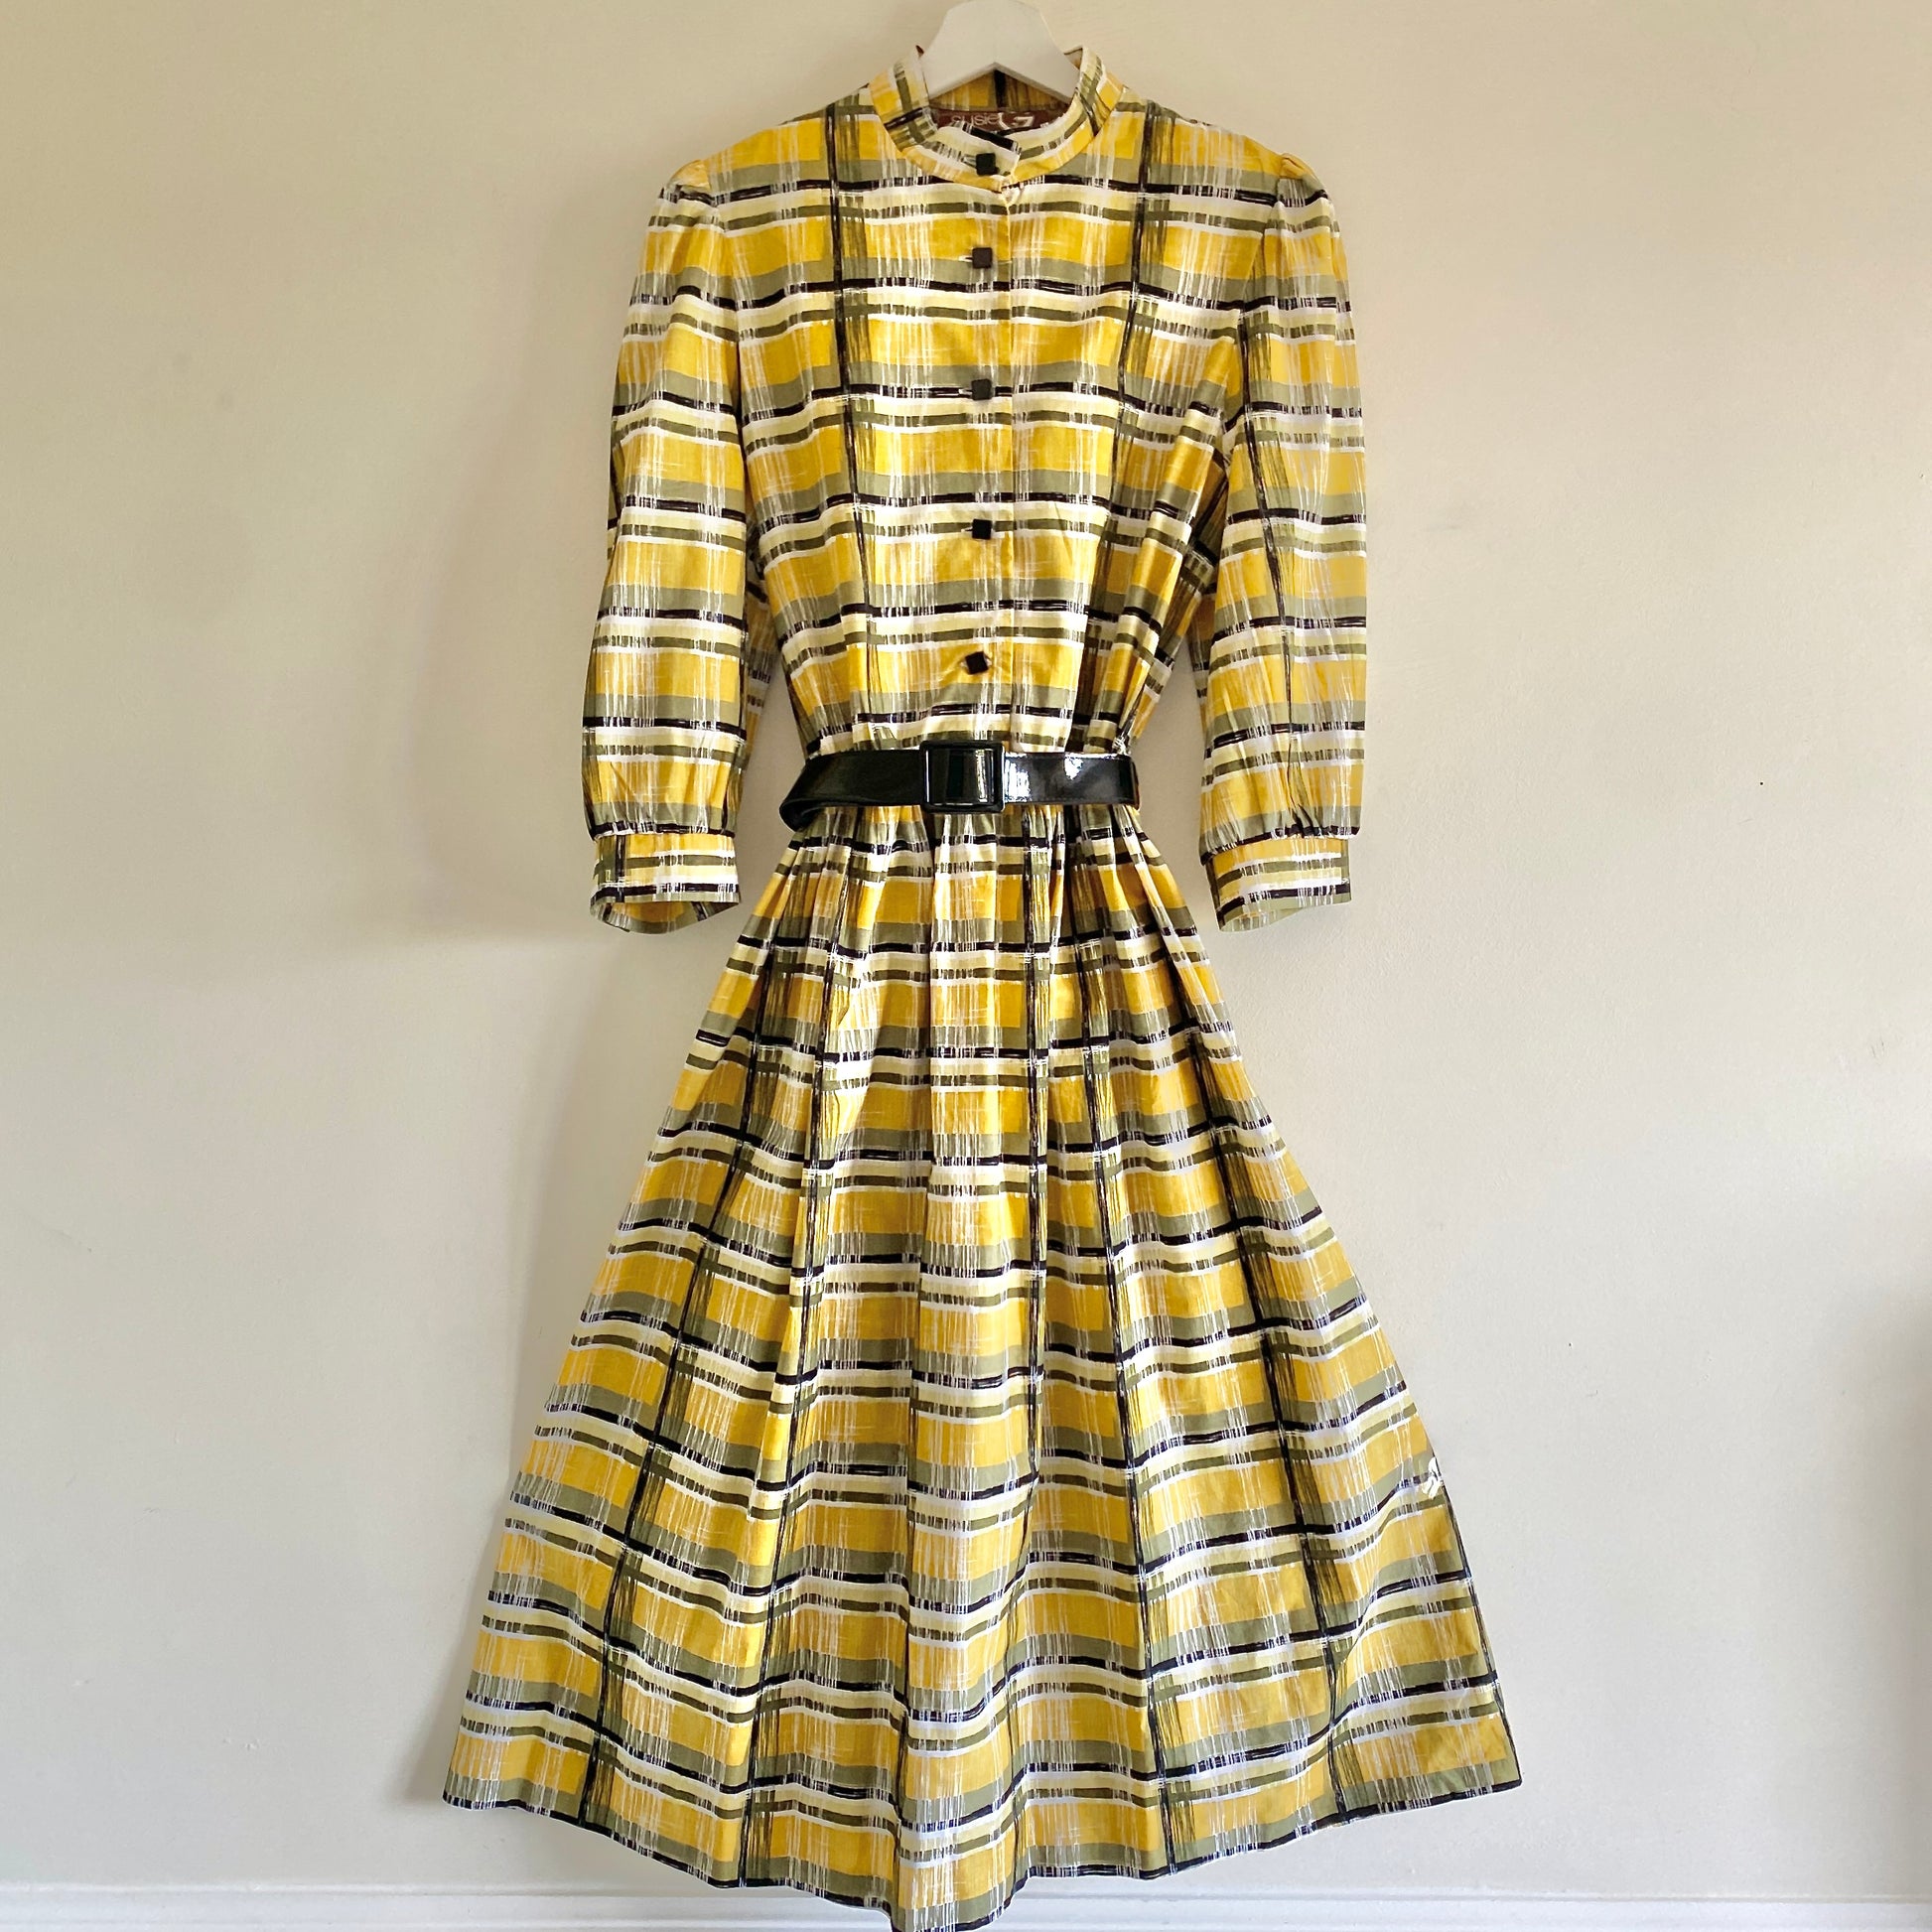 60S VINTAGE WOMENS YELLOW DRESS Vintage 60s print midi dress By Susie G Small stand collar  Puff shoulders with small shoulder pads 3/4 length sleeves with single button cuff Button down half front fastening Elasticated waist (stretches from 28" to 32") Full skirt Belt included 100% cotton Machine washable Vintage size 16